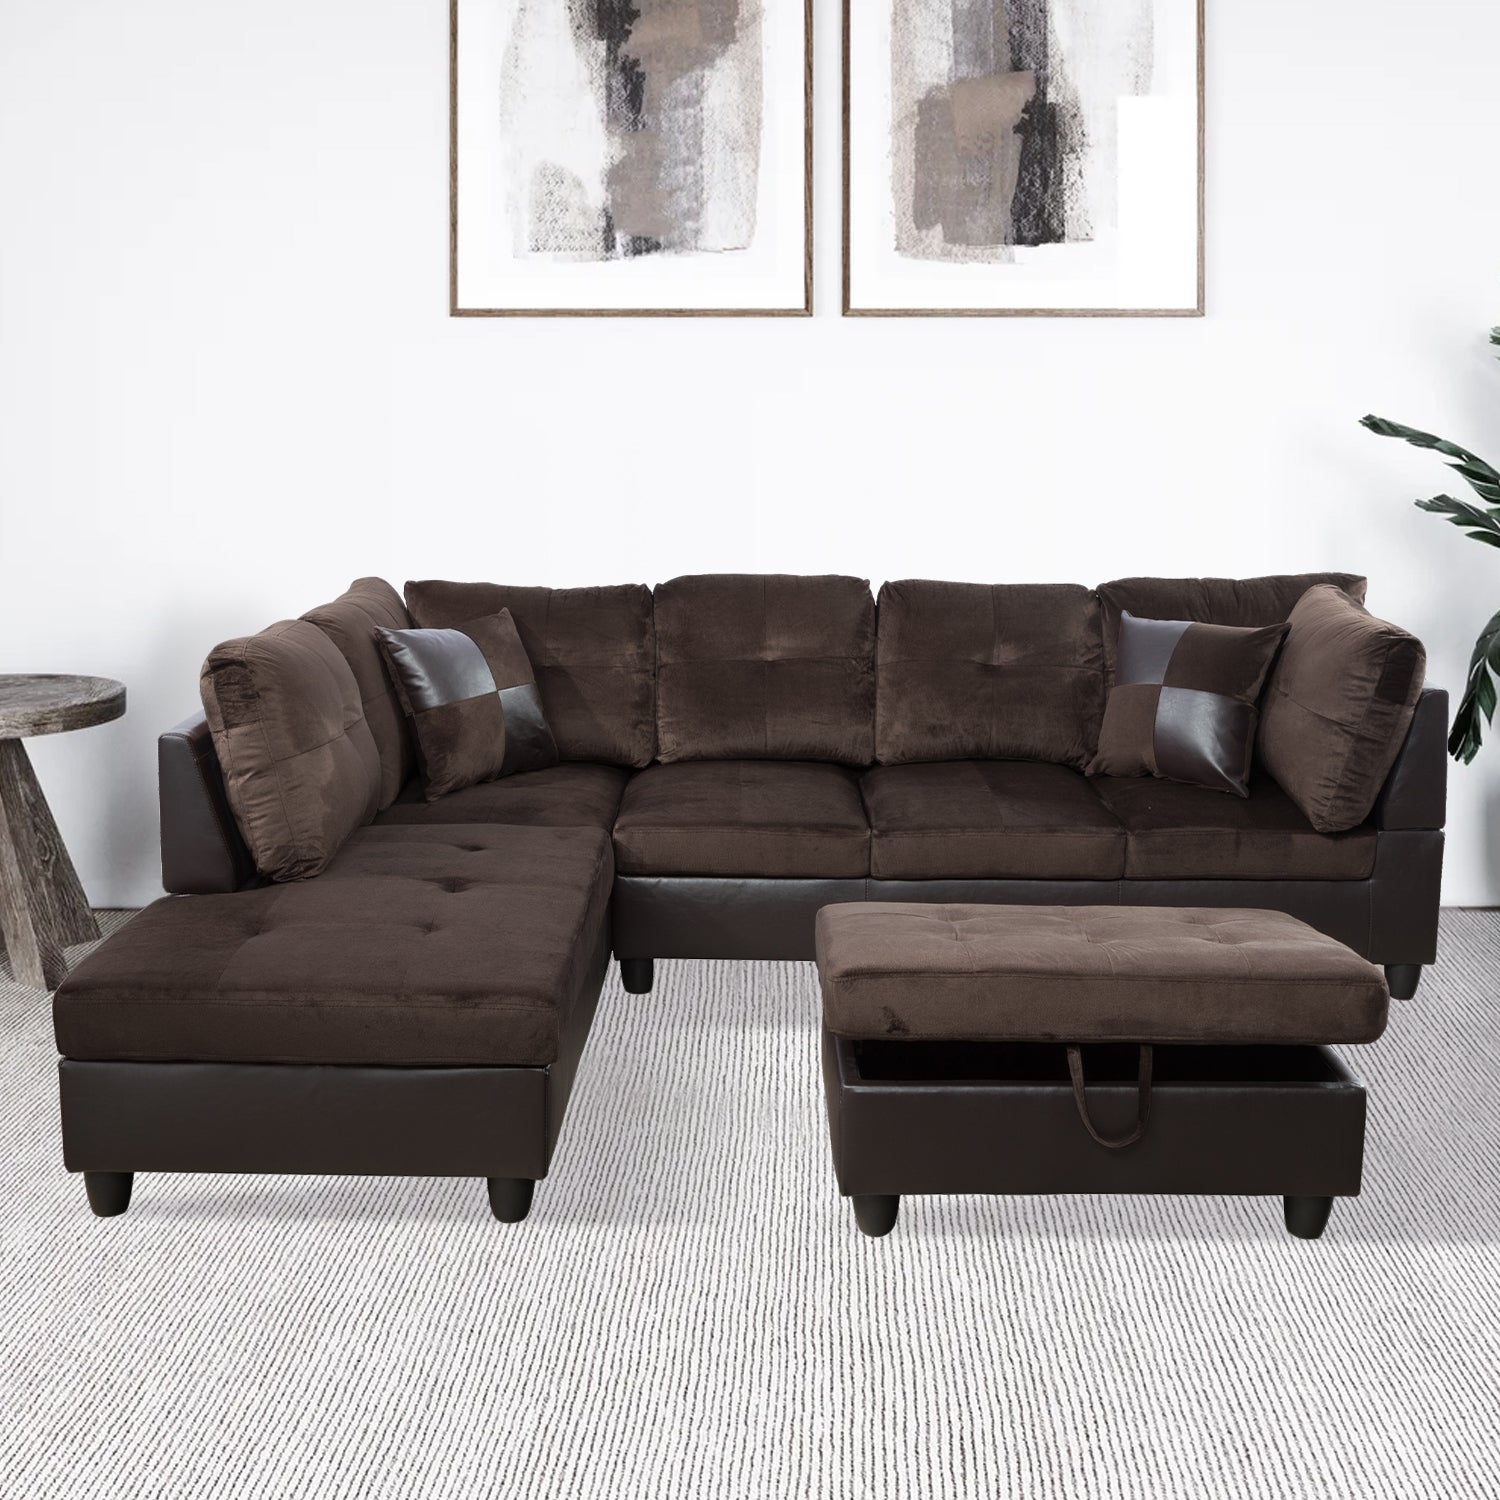 AInehome Brown Lint And PVC 3-Piece Couch Living Room Sofa Set